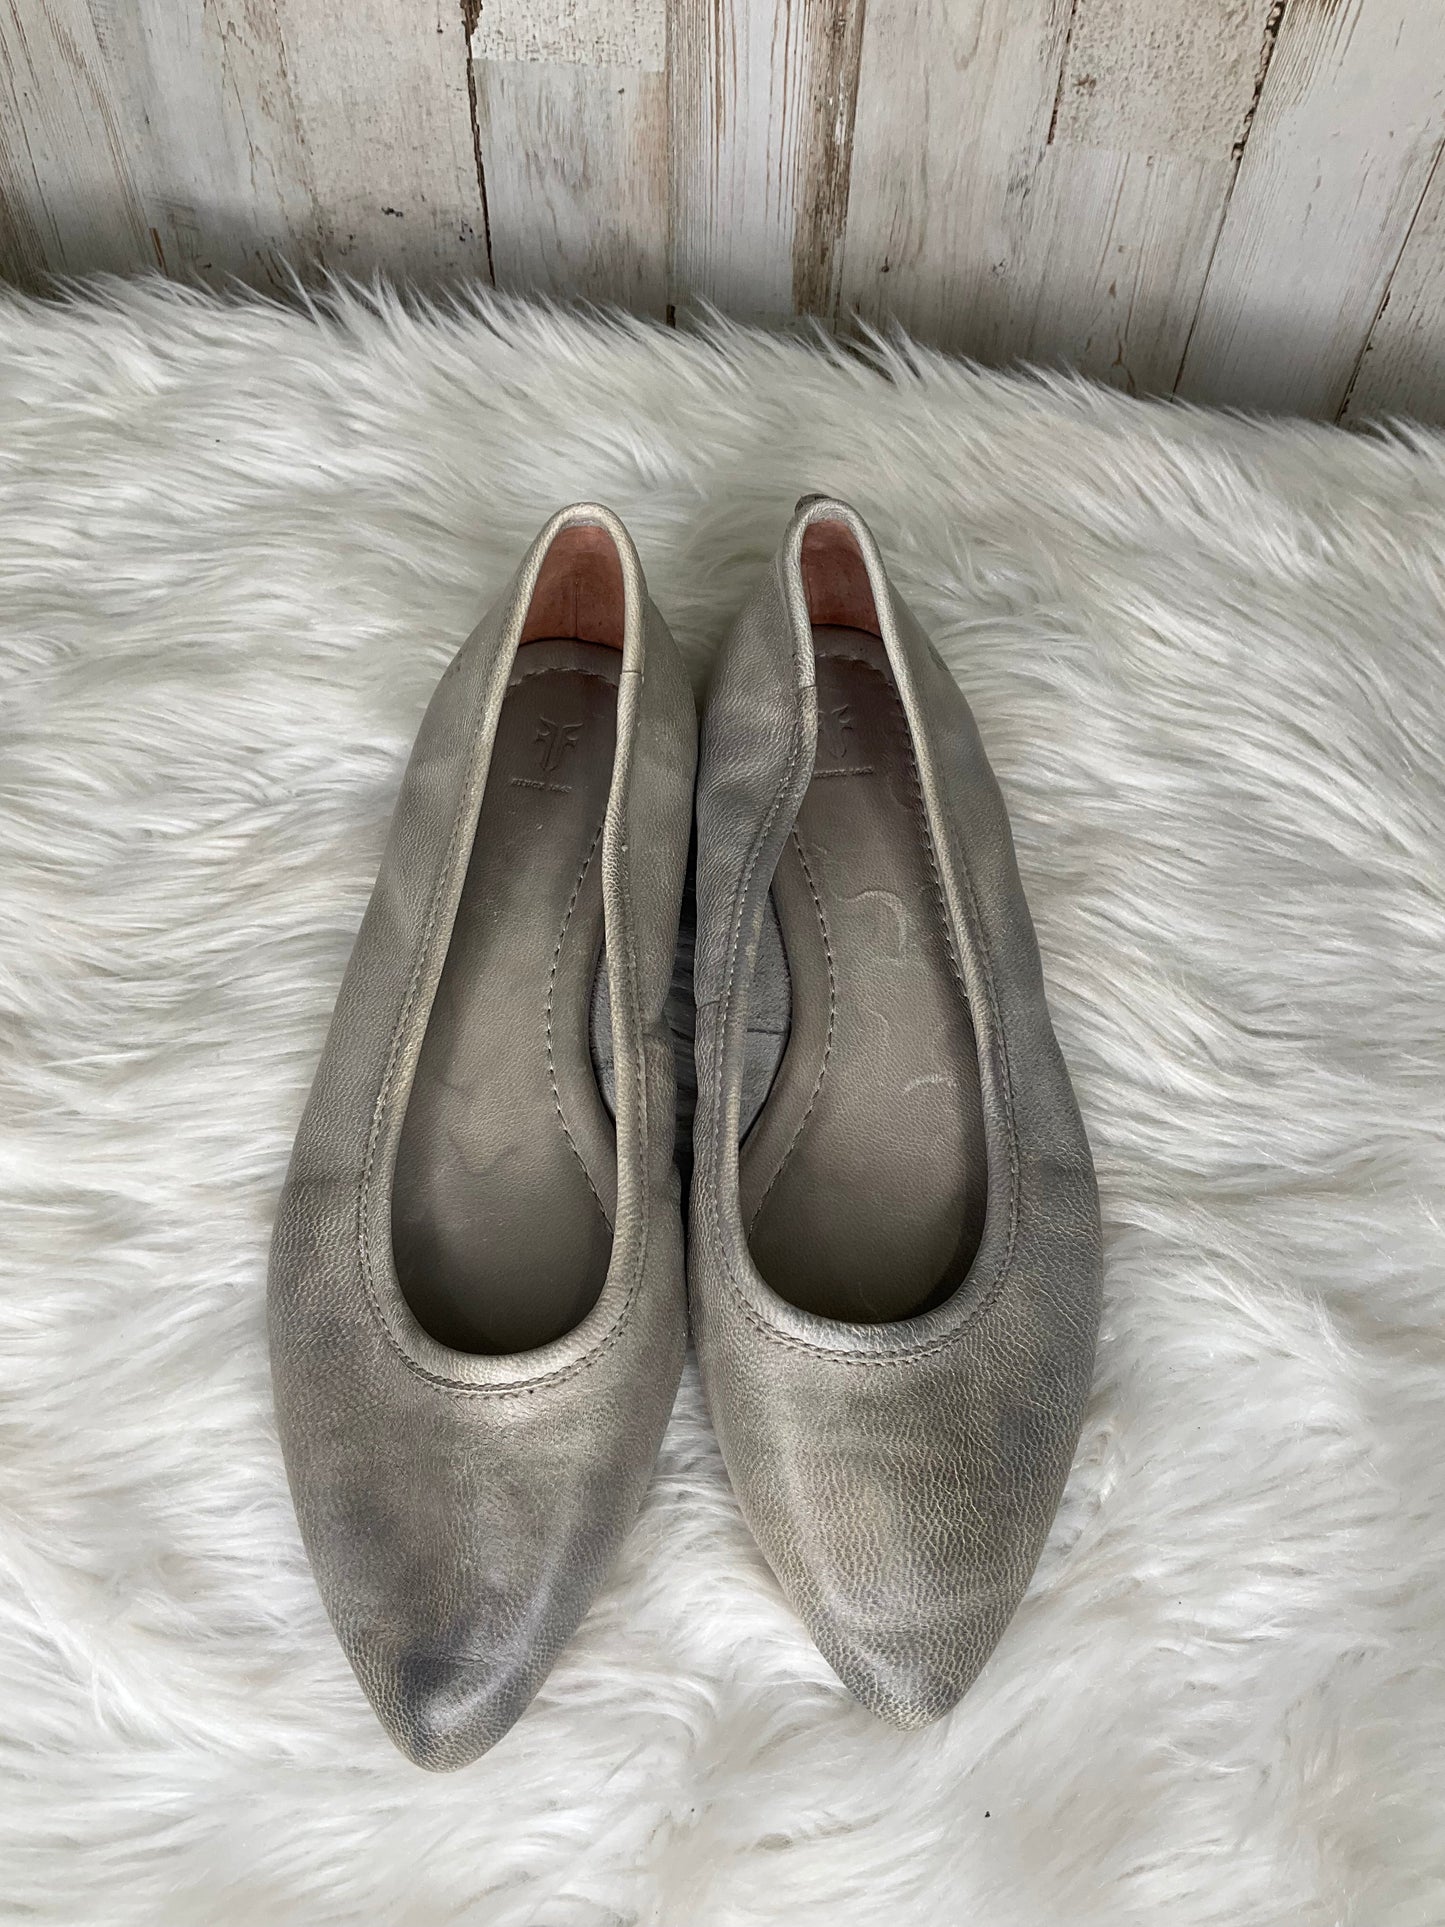 Shoes Flats By Frye  Size: 6.5